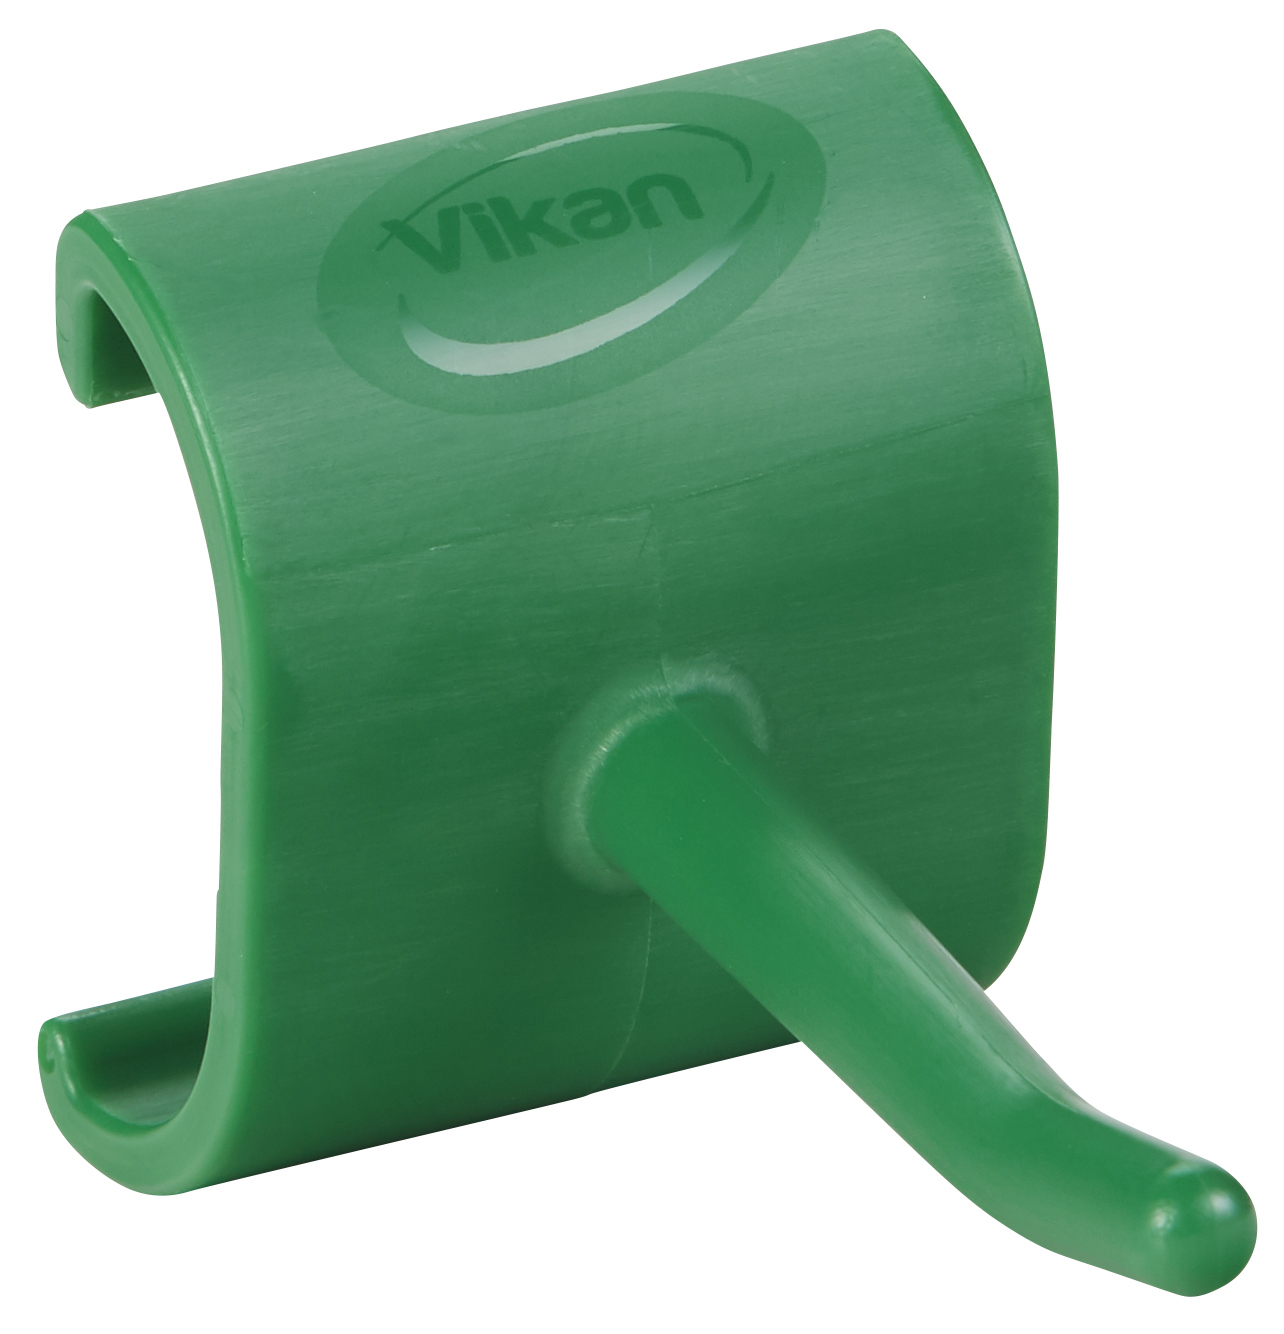 Vikan spare part hook for 1011x, 1012x & 1014x, Green